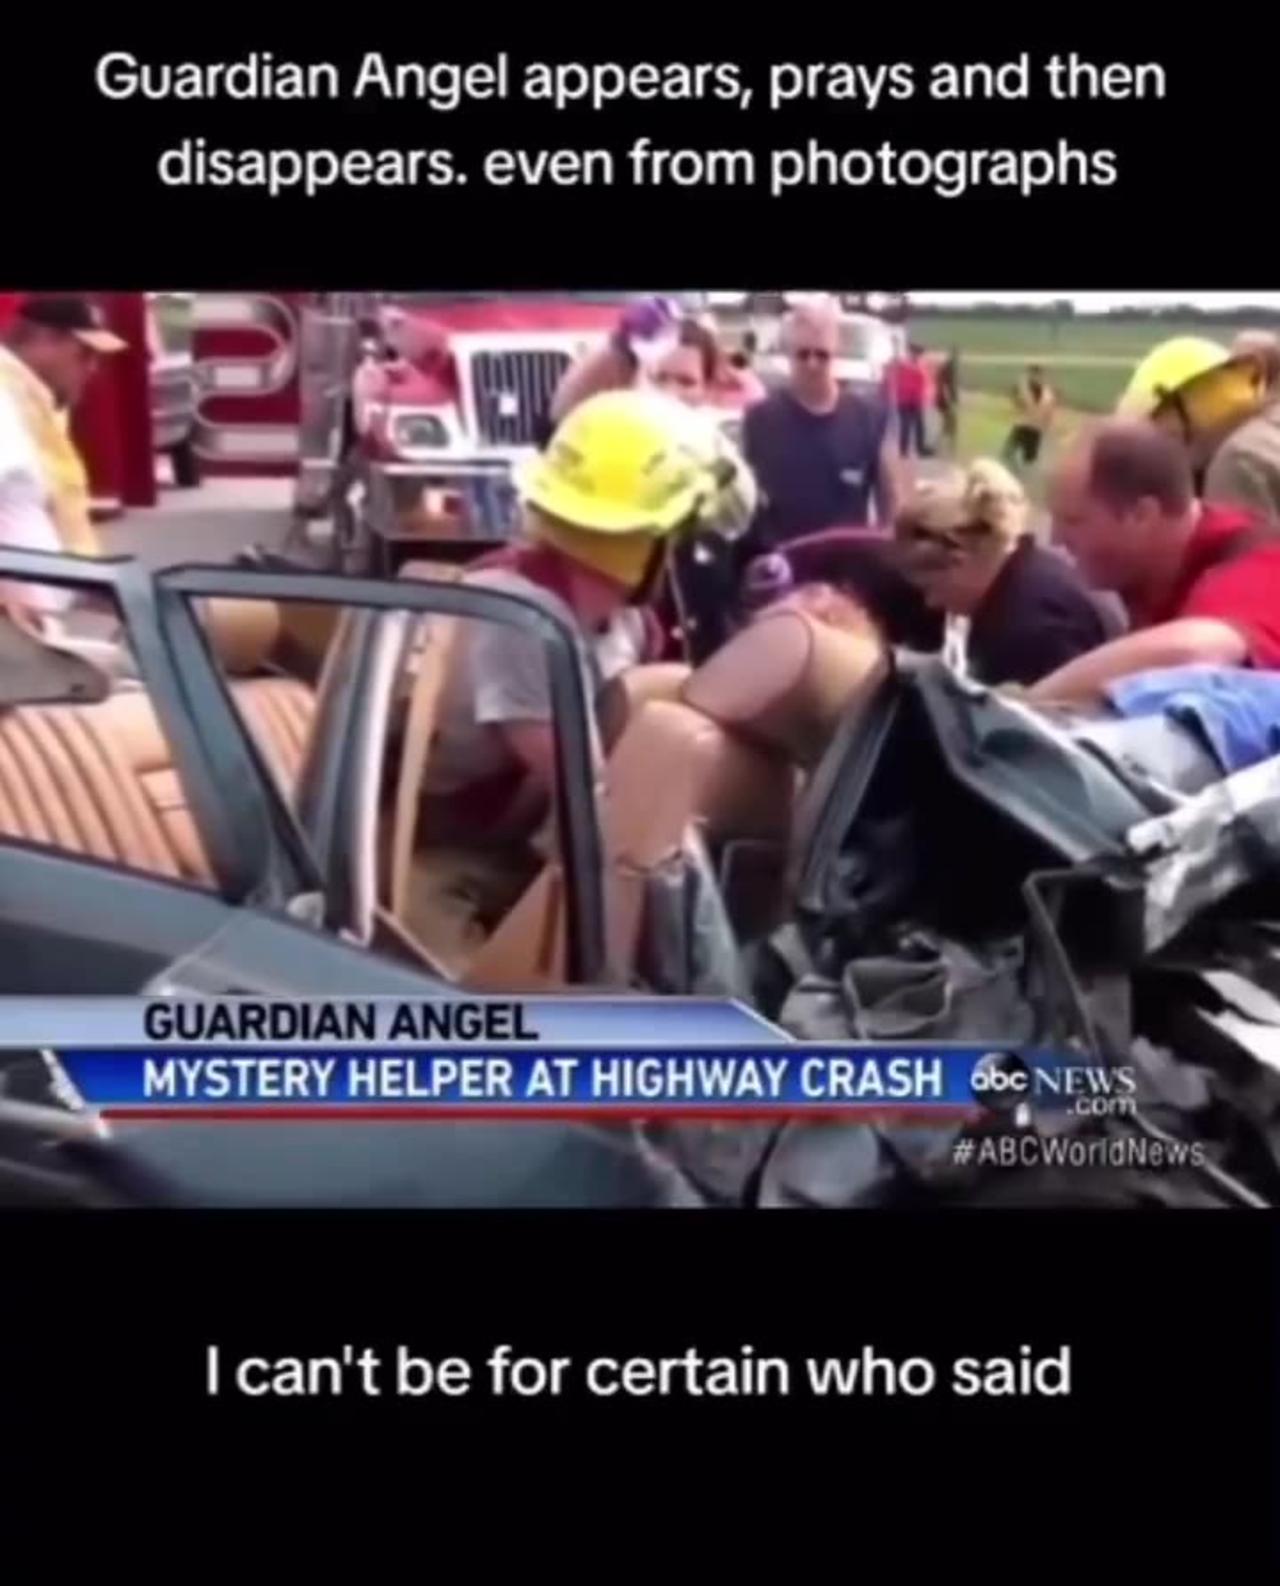 Guardian Angel appears dressed as a Catholic priest, prays and then disappears